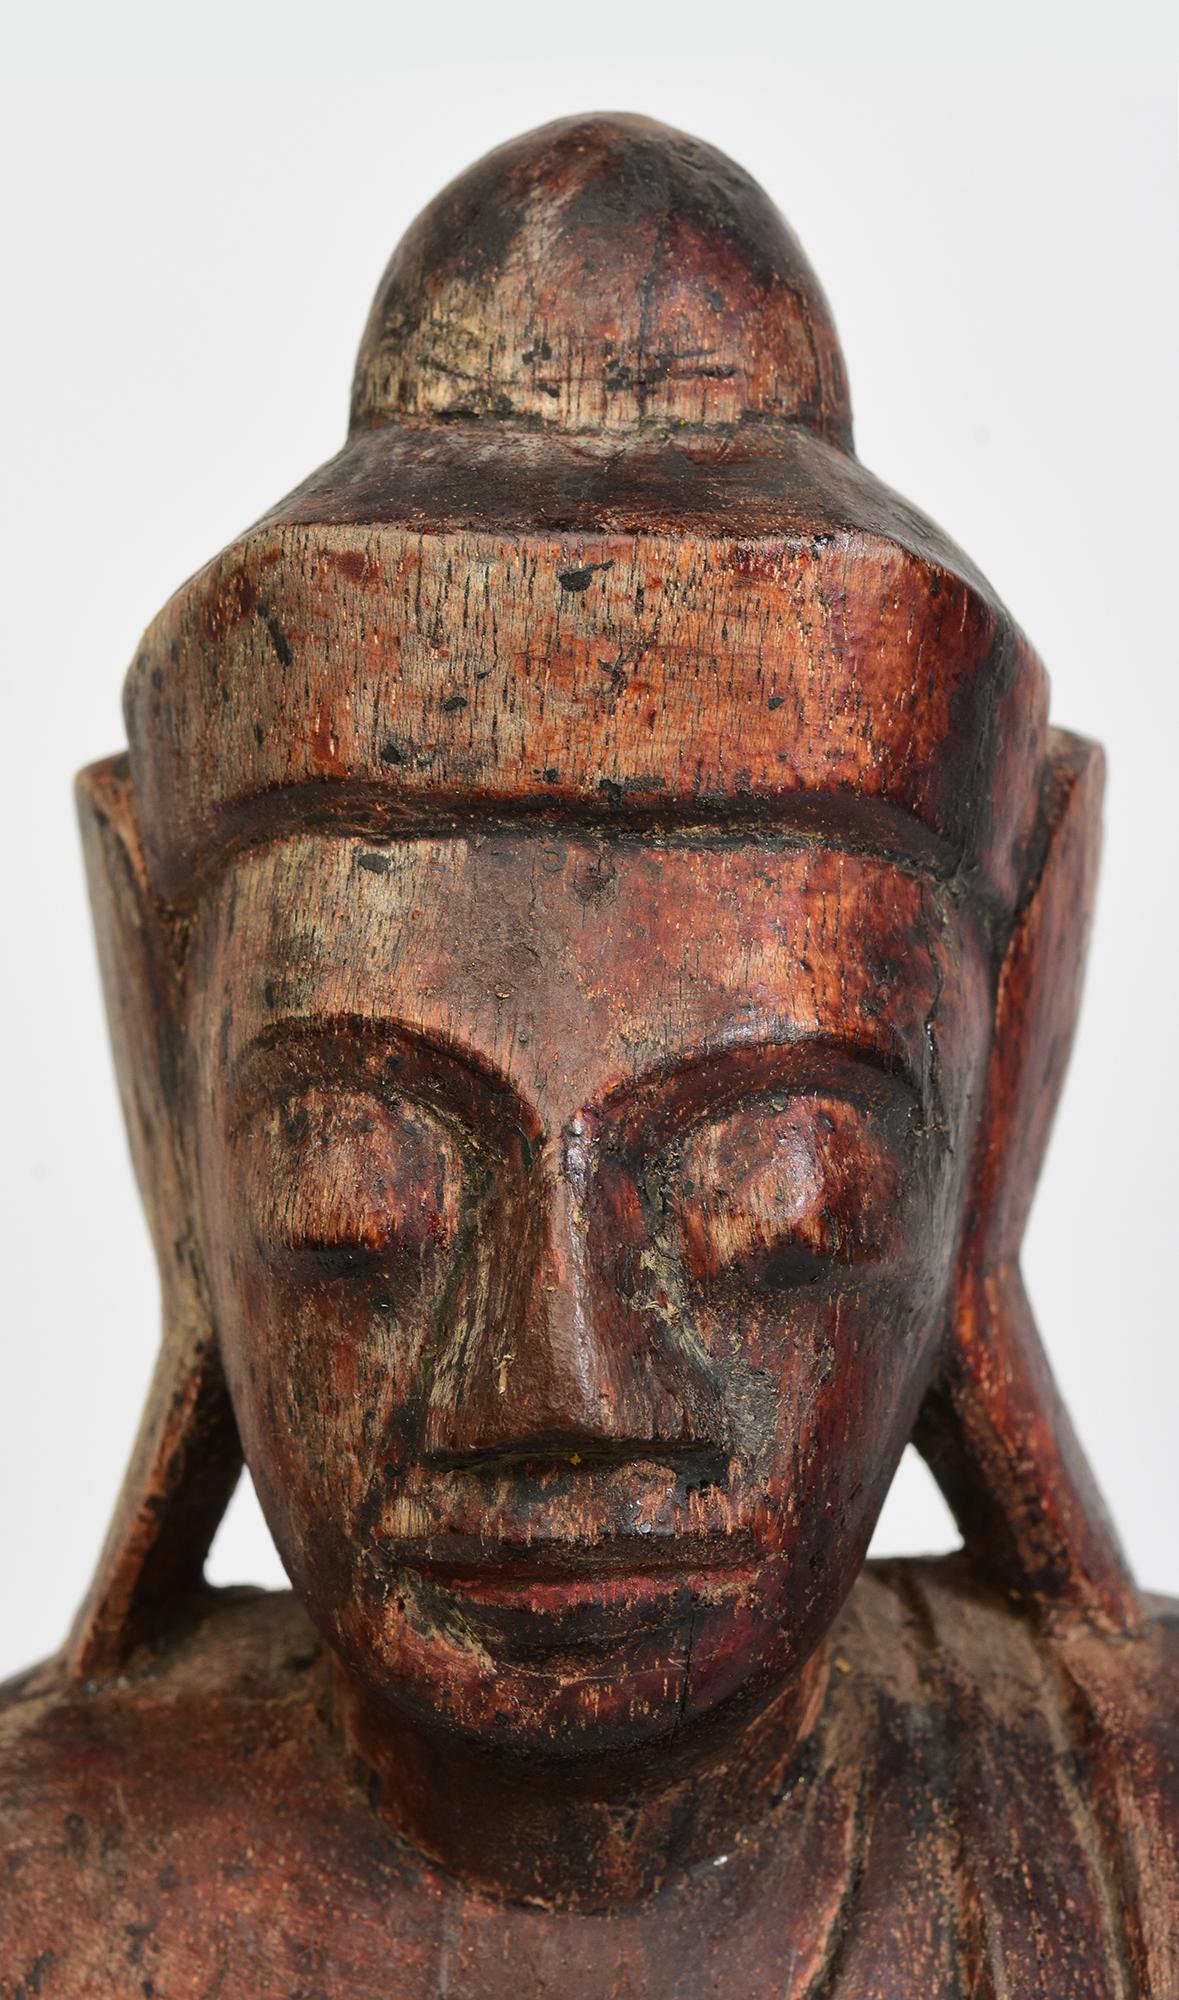 Burmese wooden Buddha sitting in Mara Vijaya (calling the earth to witness) posture on a base.

Age: Burma, Shan Period, 18th Century
Size: Height 40.4 C.M. / Width 20 C.M. / Depth 11 C.M.
Condition: Nice condition overall (some expected degradation